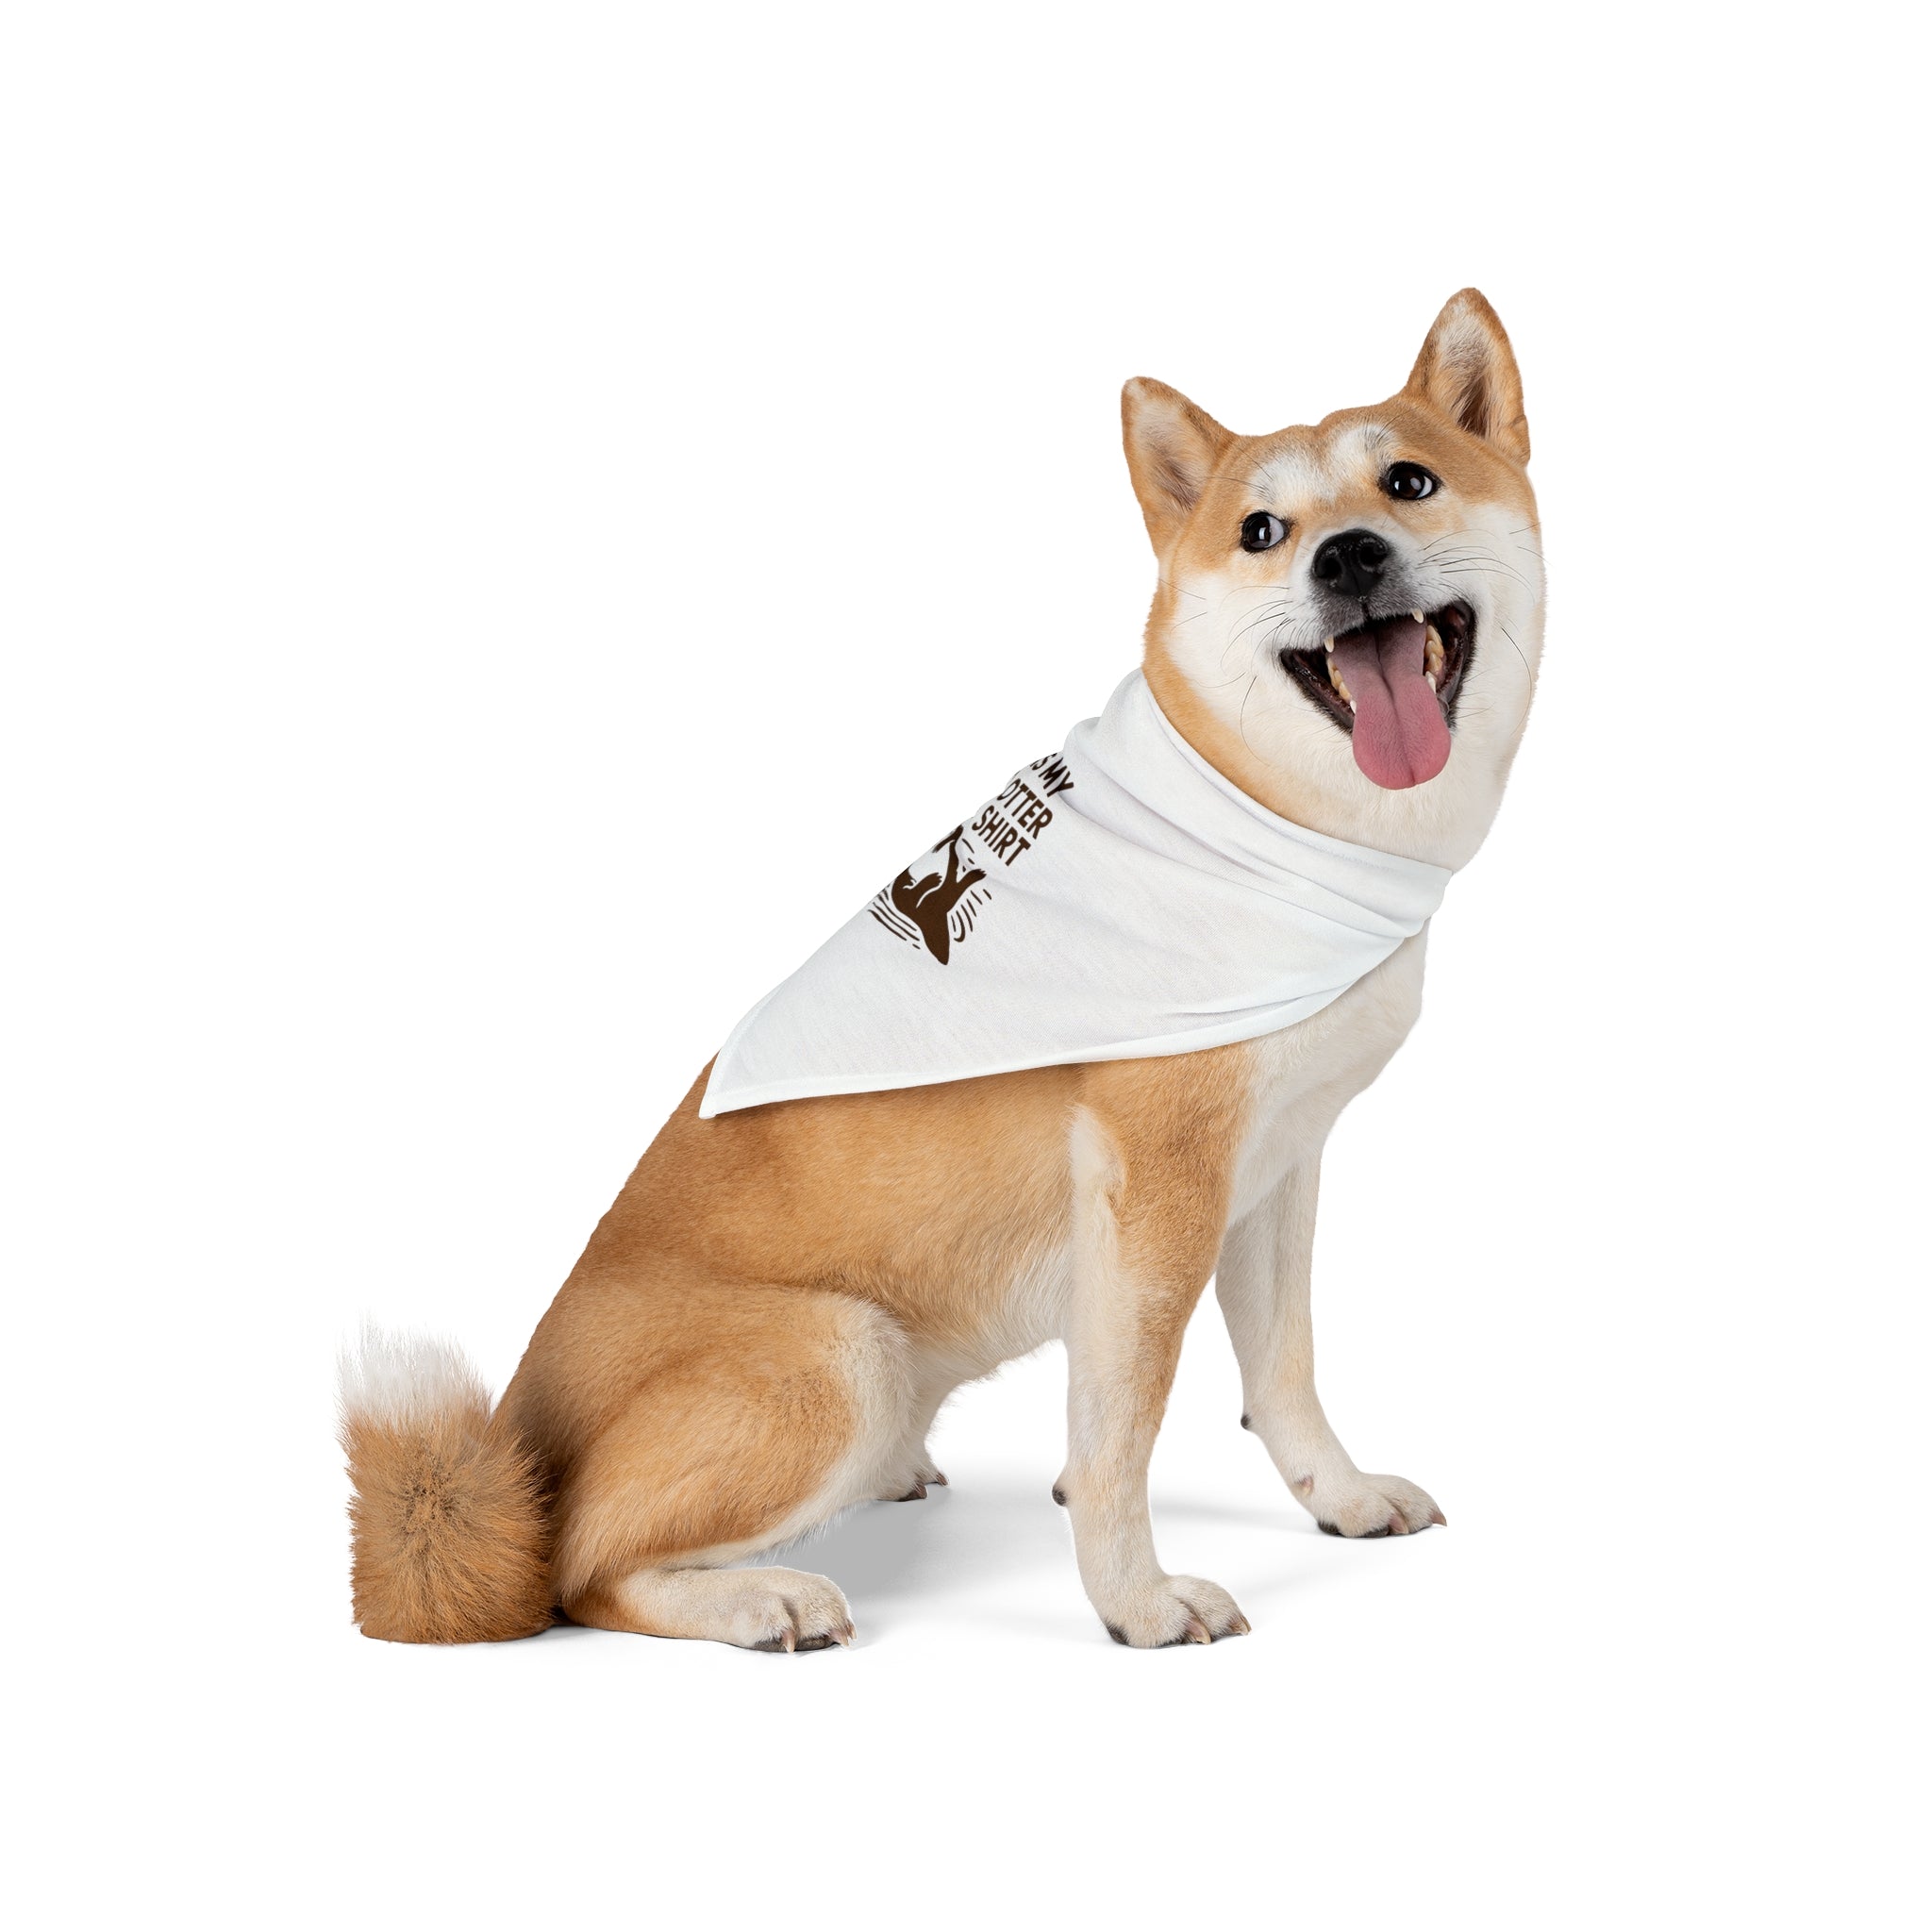 A dog with a tan and white coat is sitting and wearing a My Otter Shirt - Pet Bandana. The dog is looking to the side with its mouth open and tongue out.